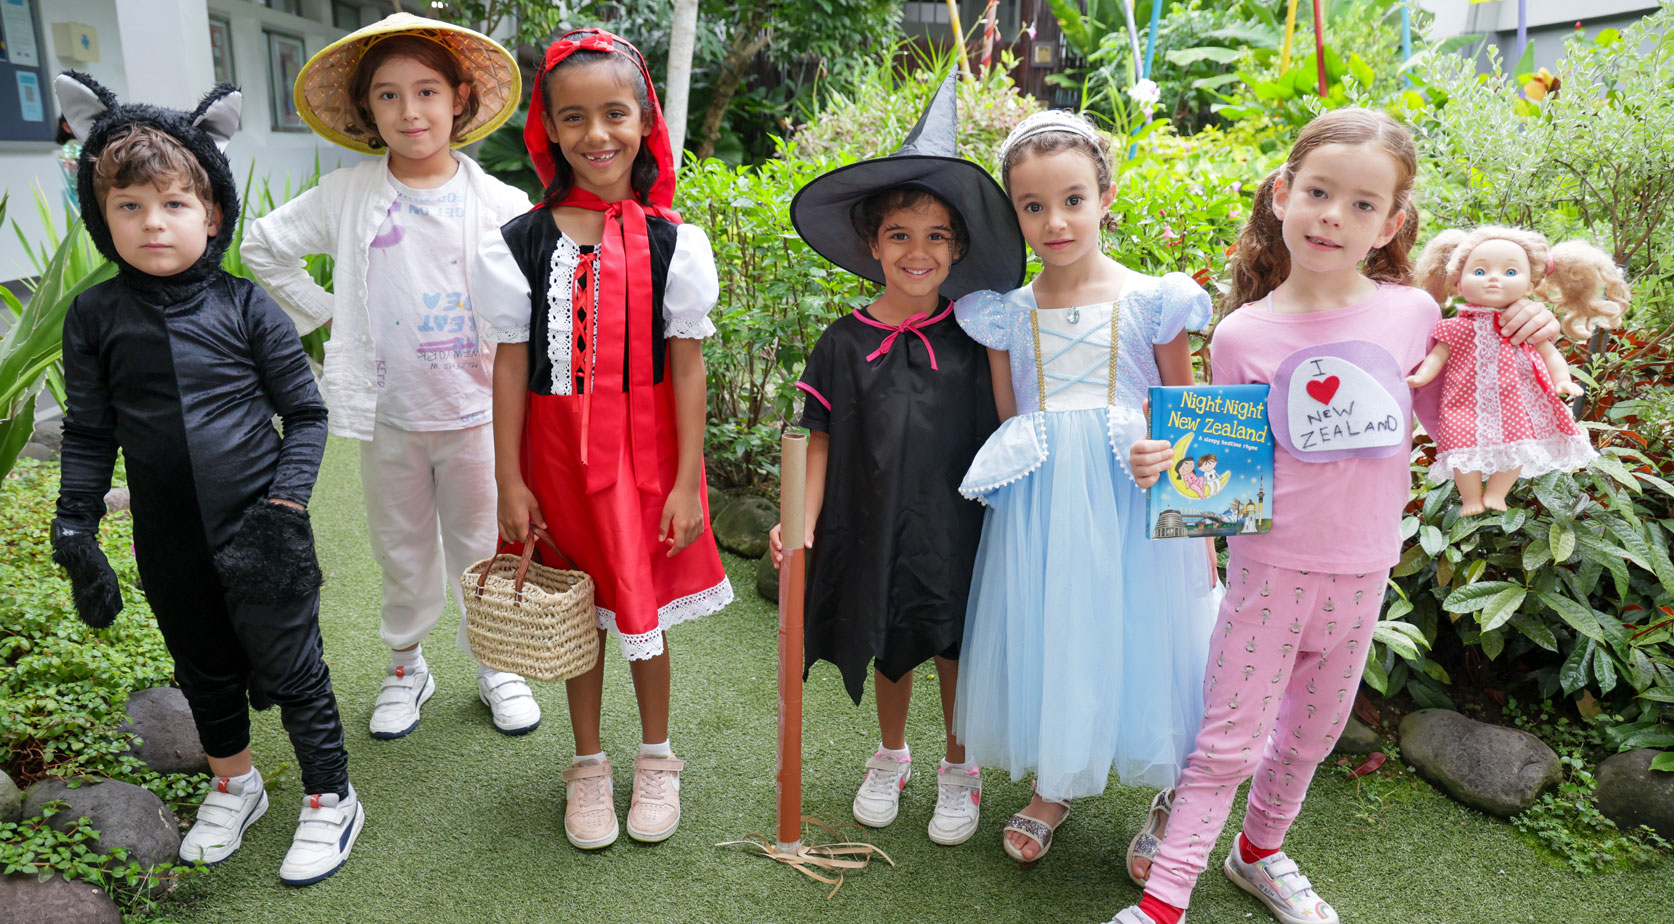 Dover Court Celebrates Book Week-Dover Court Celebrates Book Week-Dover-Court-Celebrates-Book-Week-5